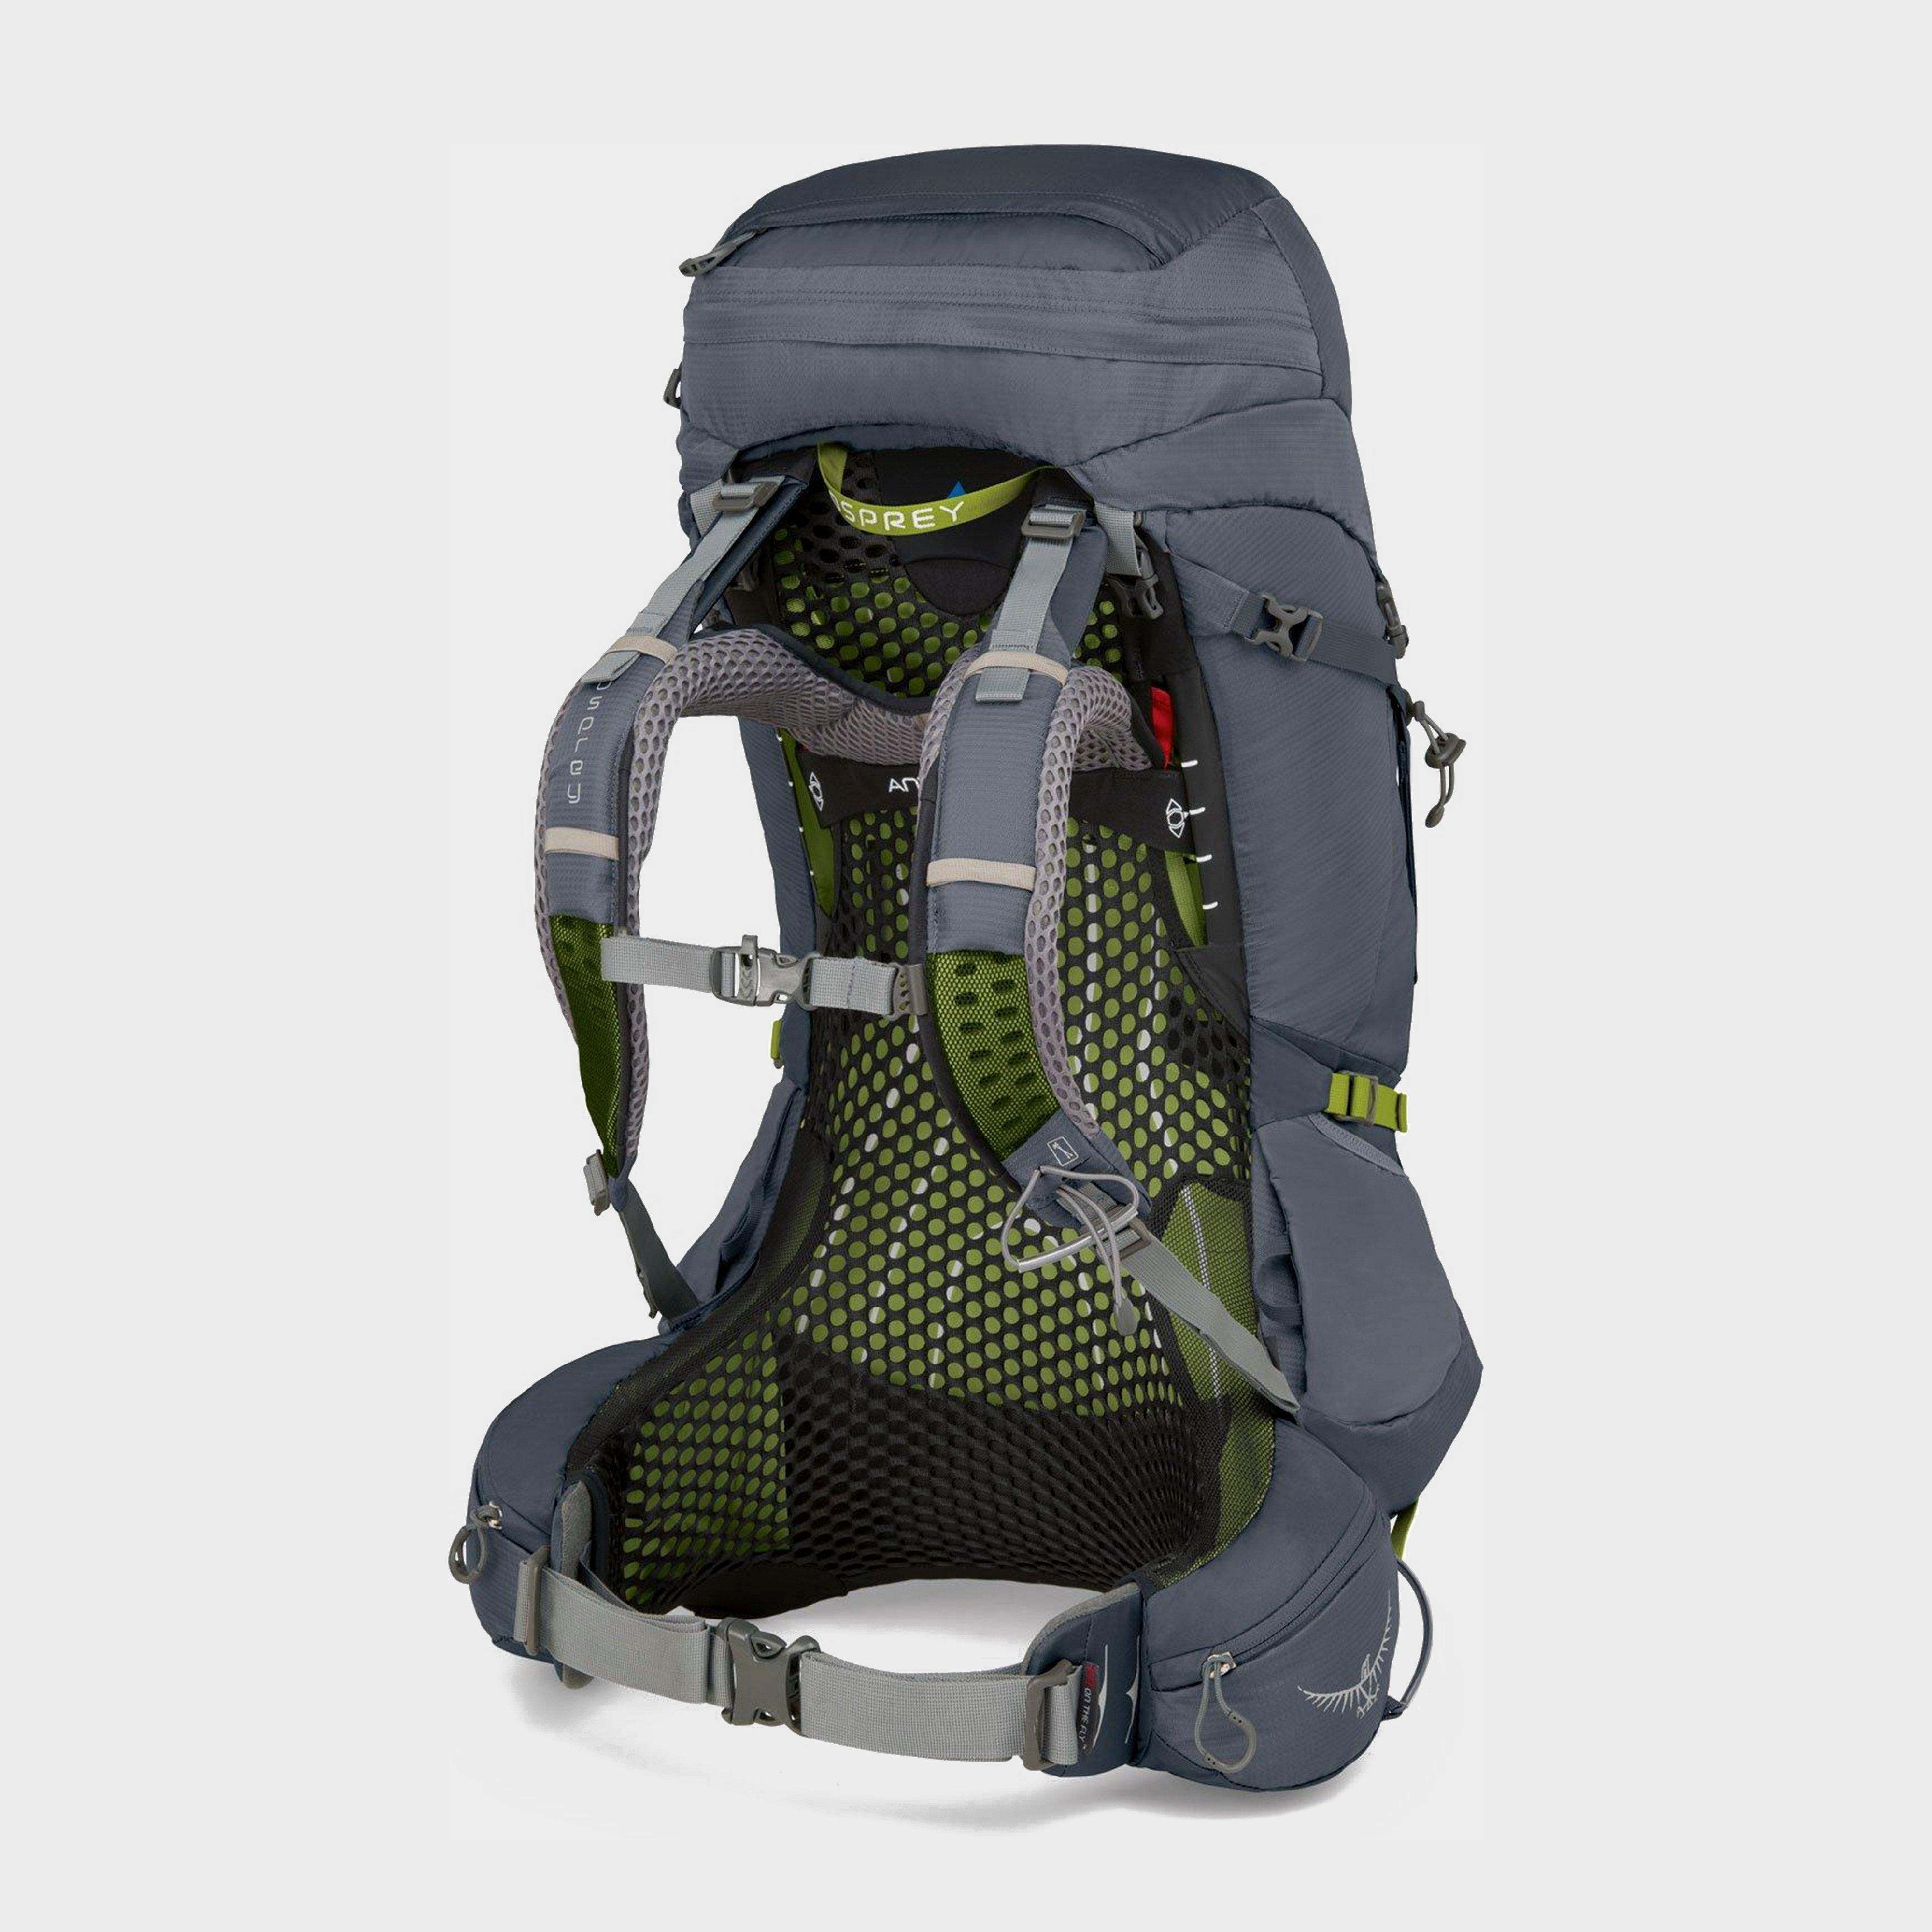 Osprey Atmos AG 50 M Backpack Review